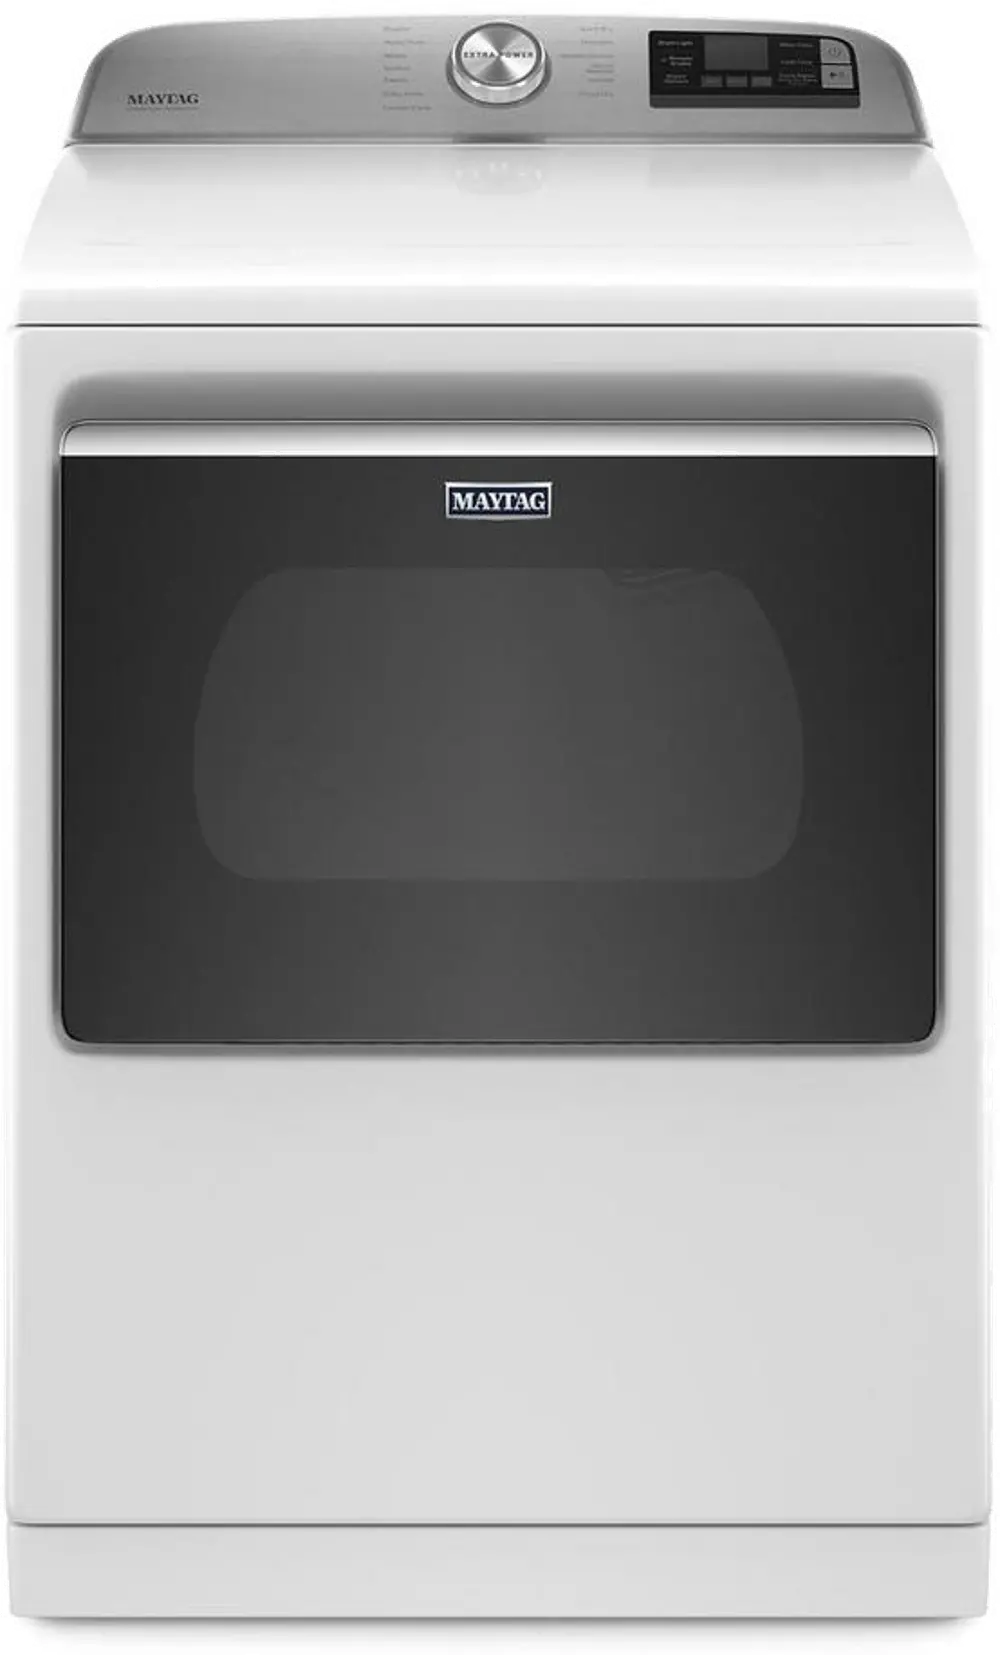 MED7230HW Maytag Smart Capable Electric Dryer with Extra Power Button - 7.4 Cu. Ft.-1